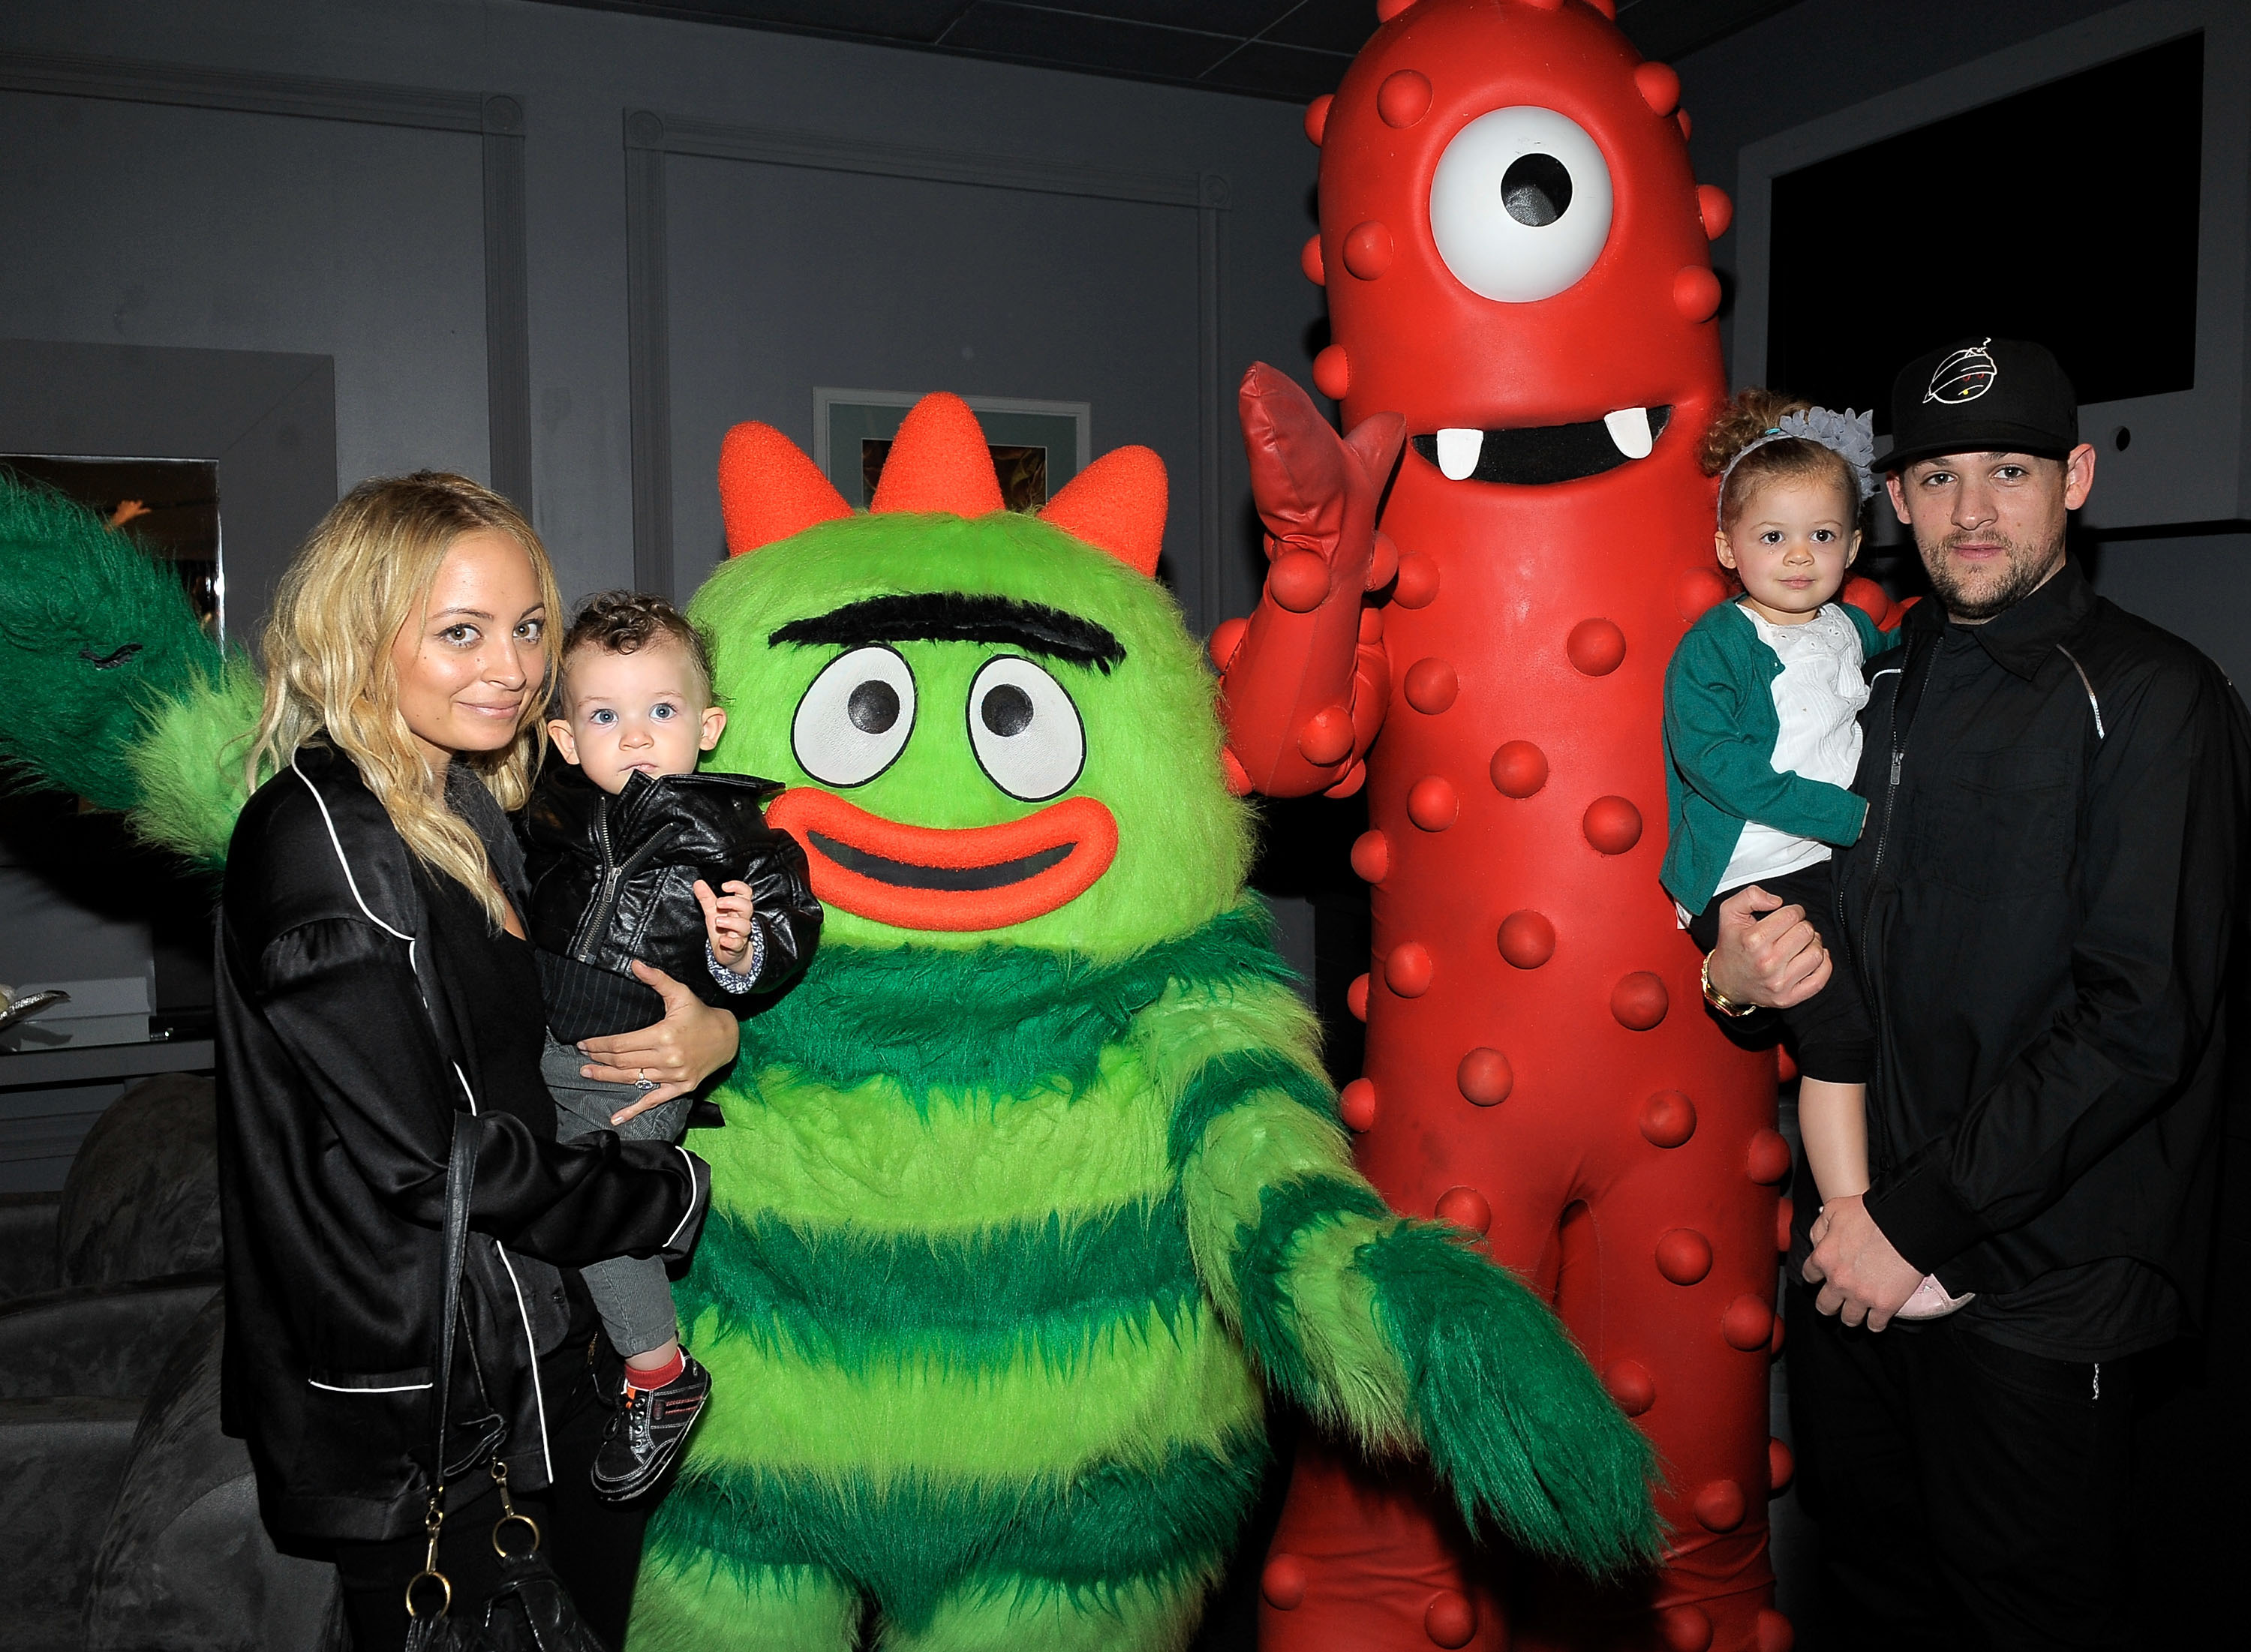 Nicole Richie, Sparrow Madden, Harlow Madden and Joel Madden posing with "Yo Gabba Gabba!" characters at the "Yo Gabba Gabba!" Live! There's A Party In My City! event in Los Angeles, California on November 27, 2010 | Source: Getty Images